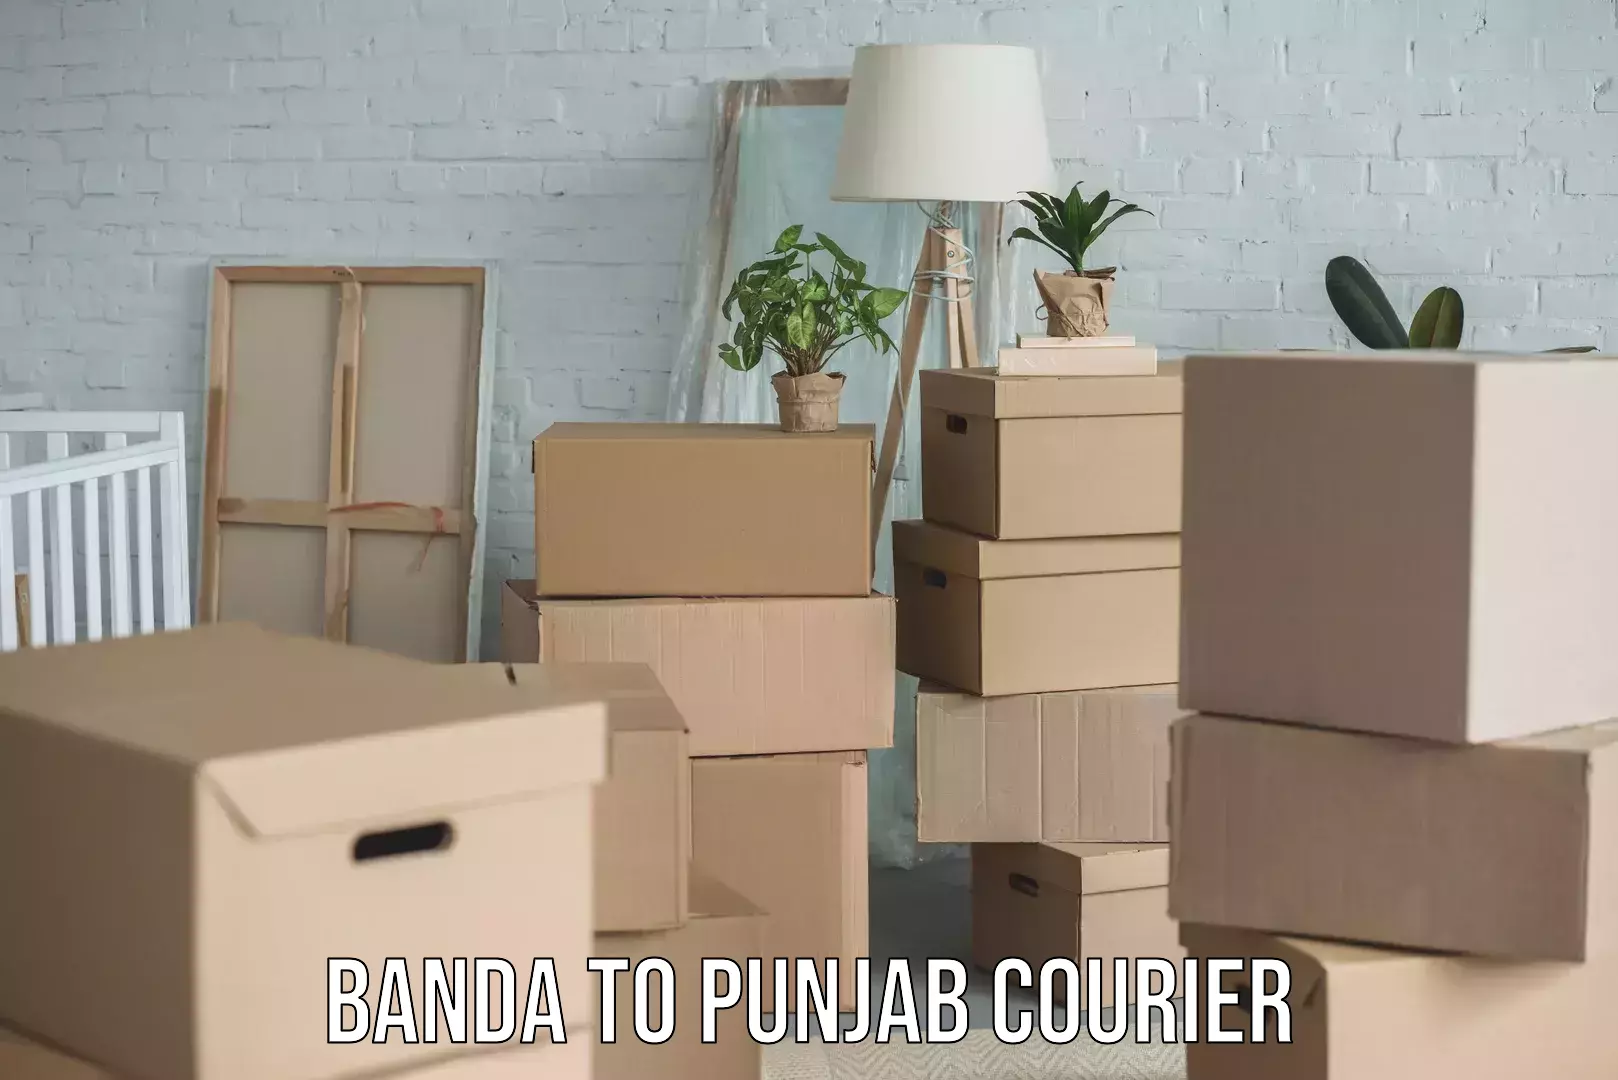 Same-day delivery options in Banda to Punjab